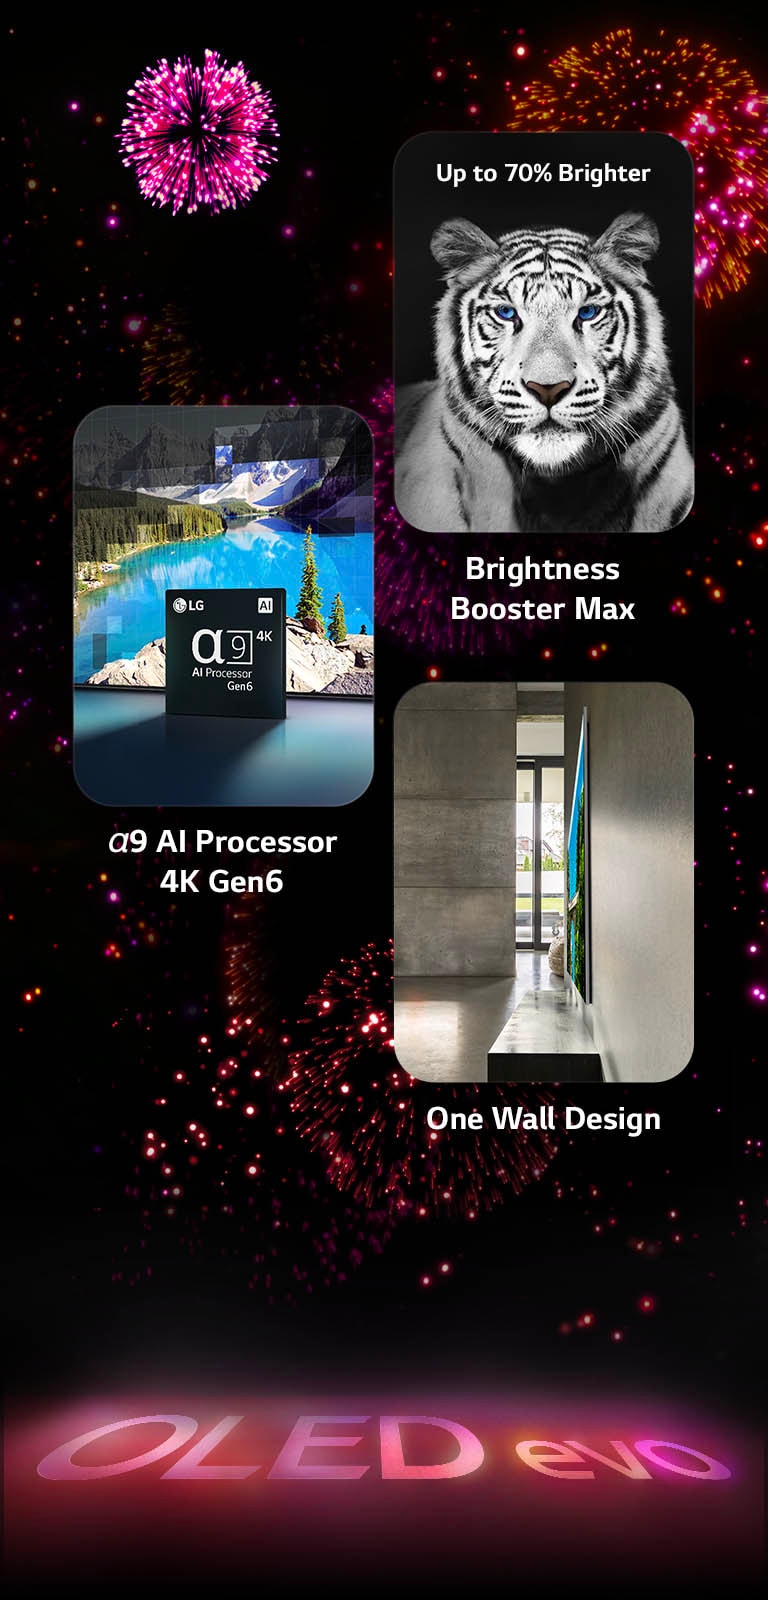 An image presenting the key features of the LG OLED evo G3 against a black background with a pink and purple firework display. The pink reflection from the firework display on the ground shows the words "OLED evo." Within the picture, an image depicting the α9 AI Processor 4K Gen6 shows the chip standing before a picture of a lake scene being remastered with the processing technology. An image presenting Brightness Booster Max shows a tiger with deep contrast and bright whites. An image presenting One Wall Design shows LG OLED evo G3 flush against the wall in a grey industrial living space.